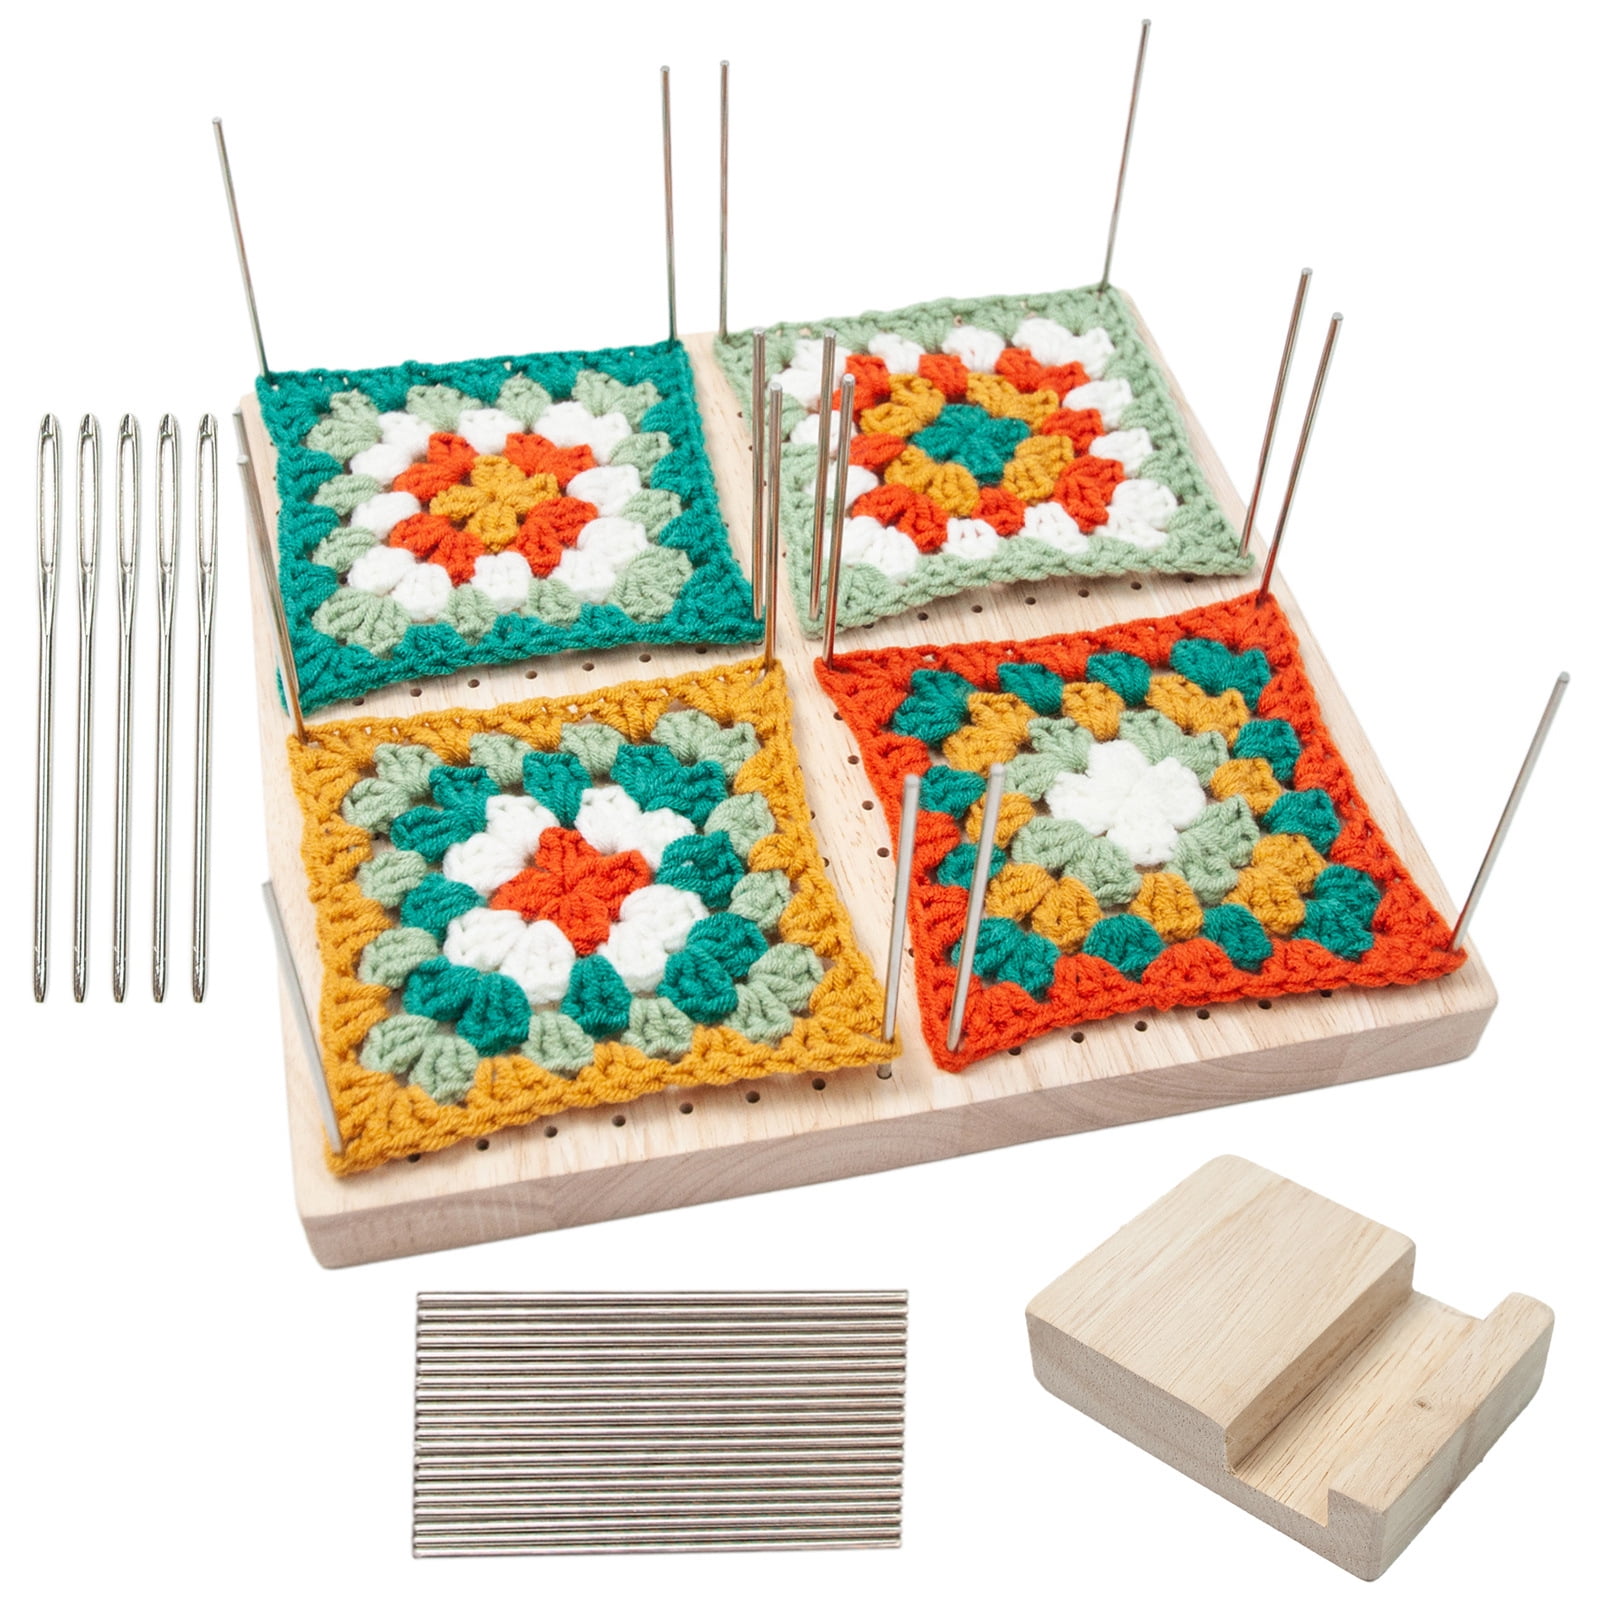  Crochet Blocking Board Blocking Mats For Knitting 9 Pack,  Christmas Gift, Thickness 0.7 inches,Standard Mat Set,150 T-Pins And  Storage Bag, Blocking Board For Crocheting Crochet Tools